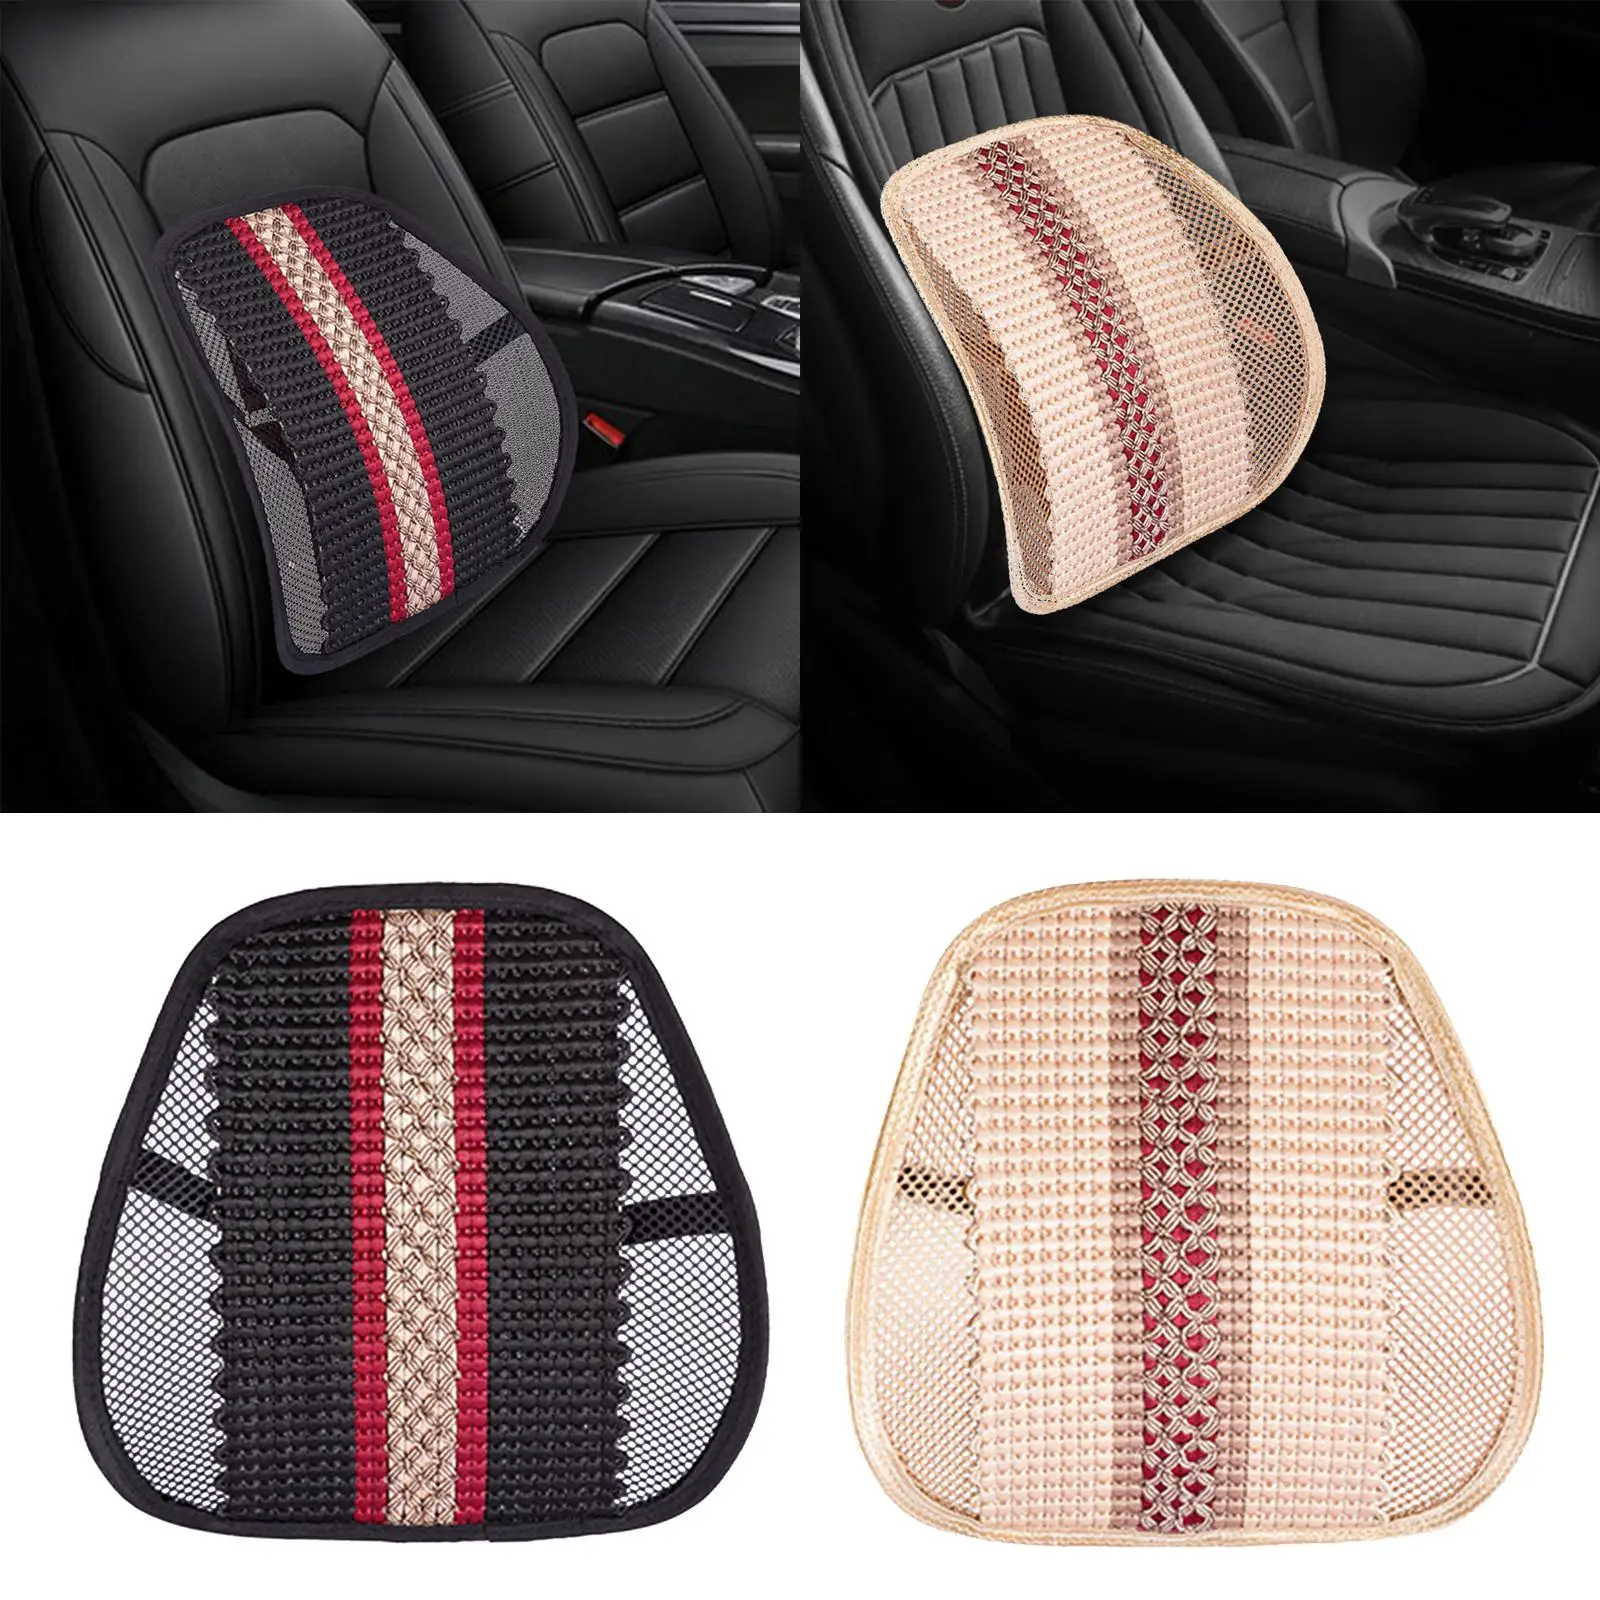 Mesh Back Support Breathable Car Support for Office Home Chair